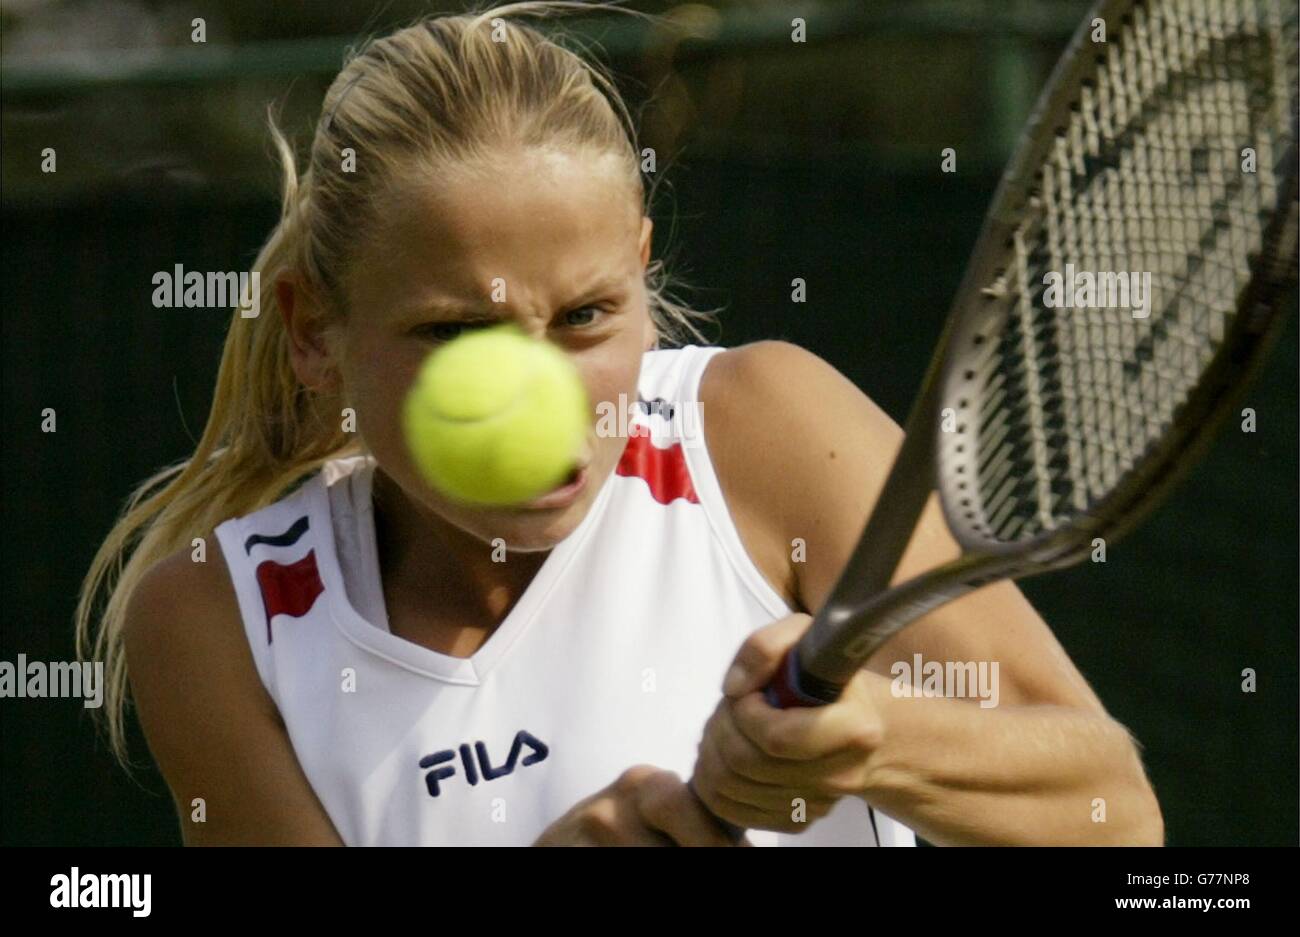 EDITORIAL USE ONLY, NO MOBILE PHONE USE : Jelena Dokic from Serbia and Montenegro in action against Emmanuelle Gagliardi from Switzerland at the All England Lawn Tennis Championships. Dokic won in straight sets 6:1/6:3. Stock Photo